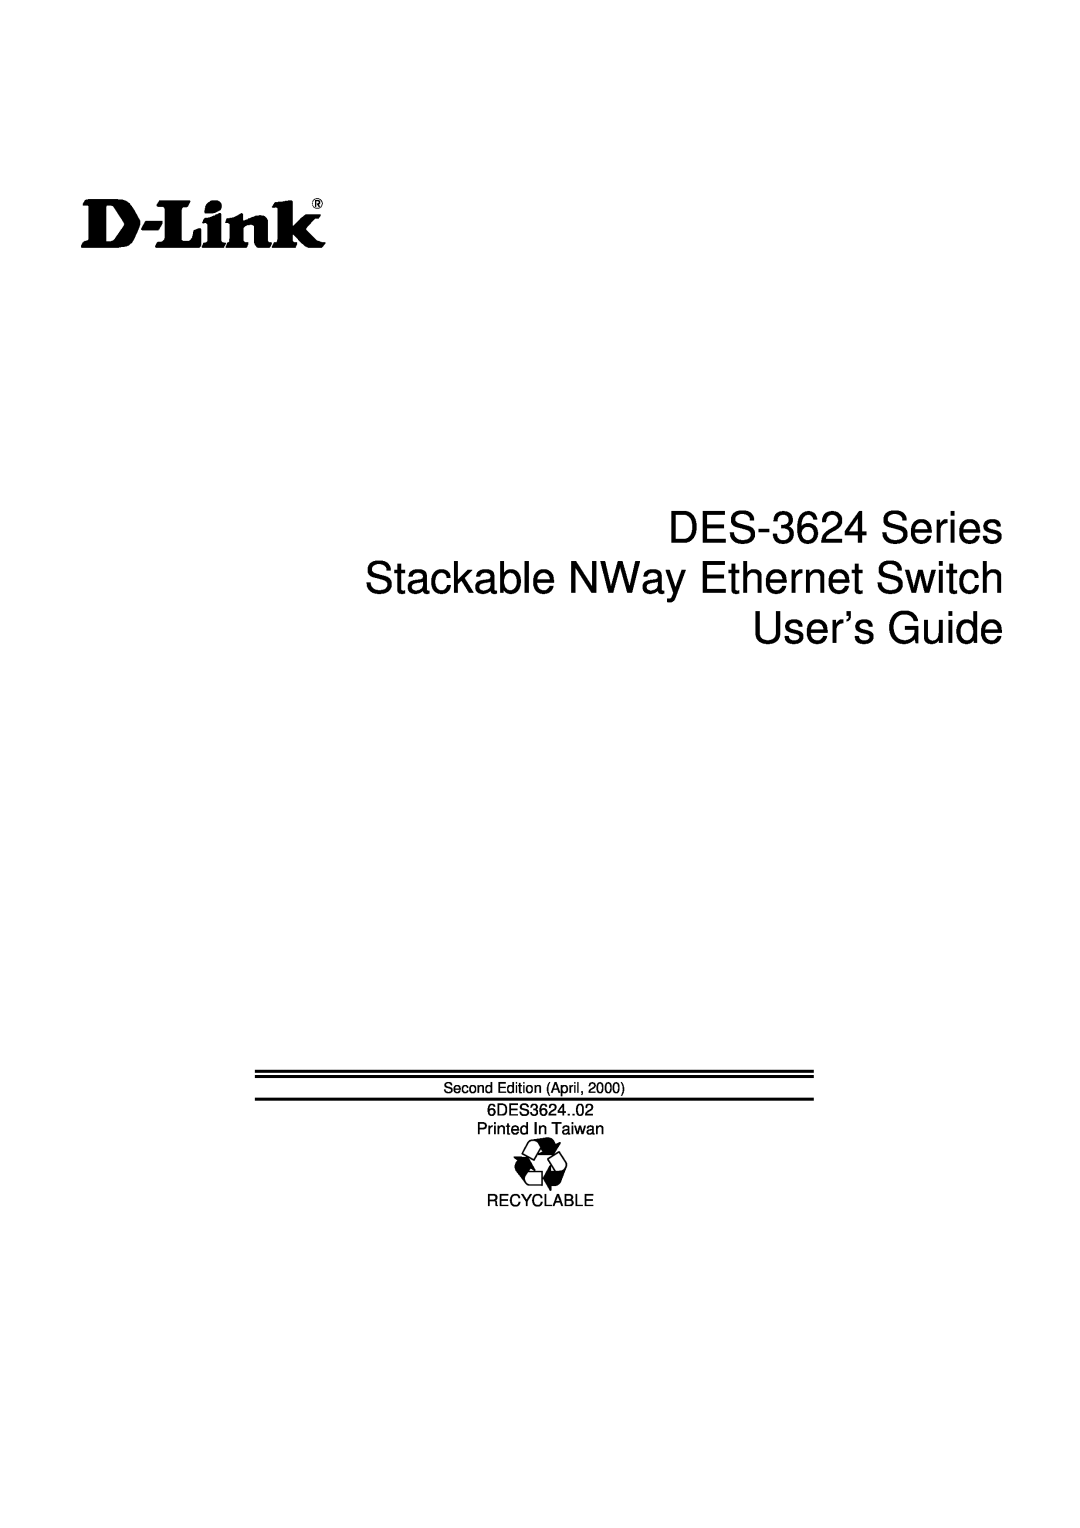 D-Link manual DES-3624 Series Stackable NWay Ethernet Switch User’s Guide, 6DES3624..02 Printed In Taiwan RECYCLABLE 